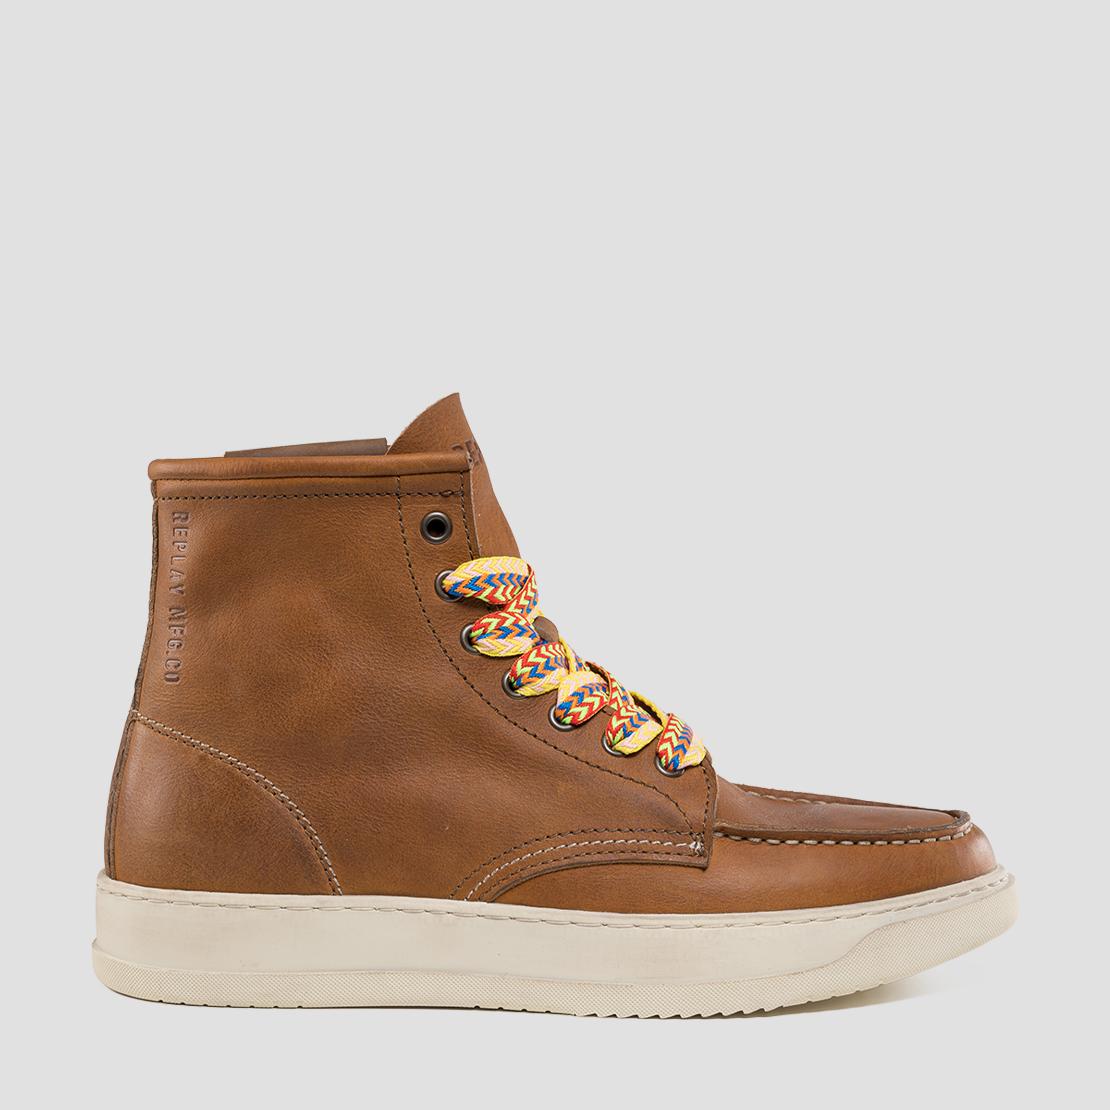 LEATHER STATUS REPLAY Menswear Riva – BOOTS COGNAC MID-CUT RELOAD